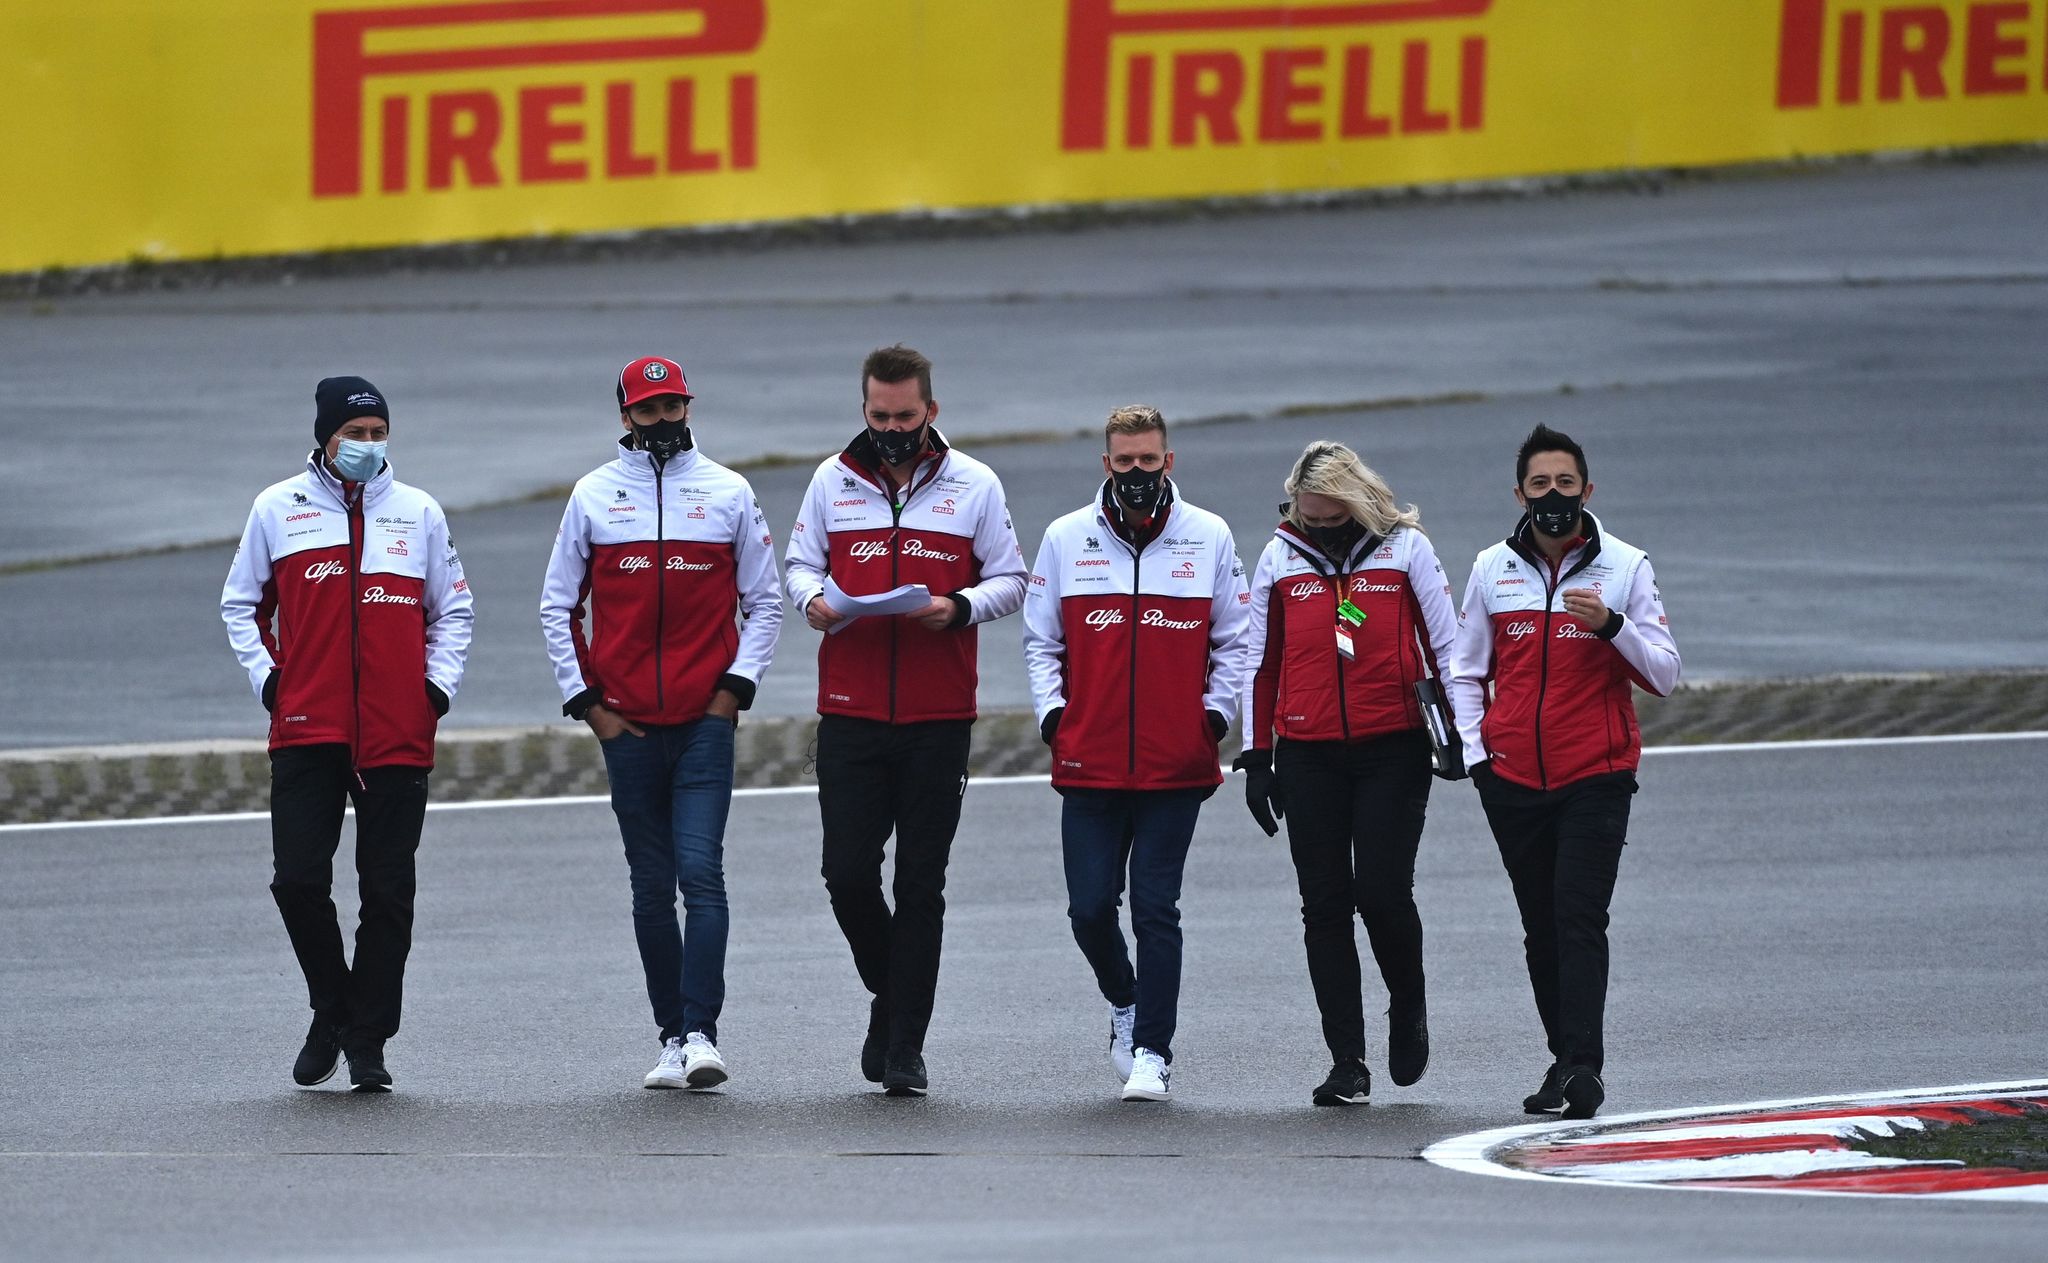 Alfa Romeo's German driver lt;HIT gt;Mick lt;/HIT gt; lt;HIT gt;Schumacher lt;/HIT gt; (3rd R) and team members inspect the circuit ahead of the Formula One - Eifel Grand Prix at the Nuerburgring circuit in Nuerburg, western Germany, on October 8, 2020. (Photo by Ina FASSBENDER / AFP)